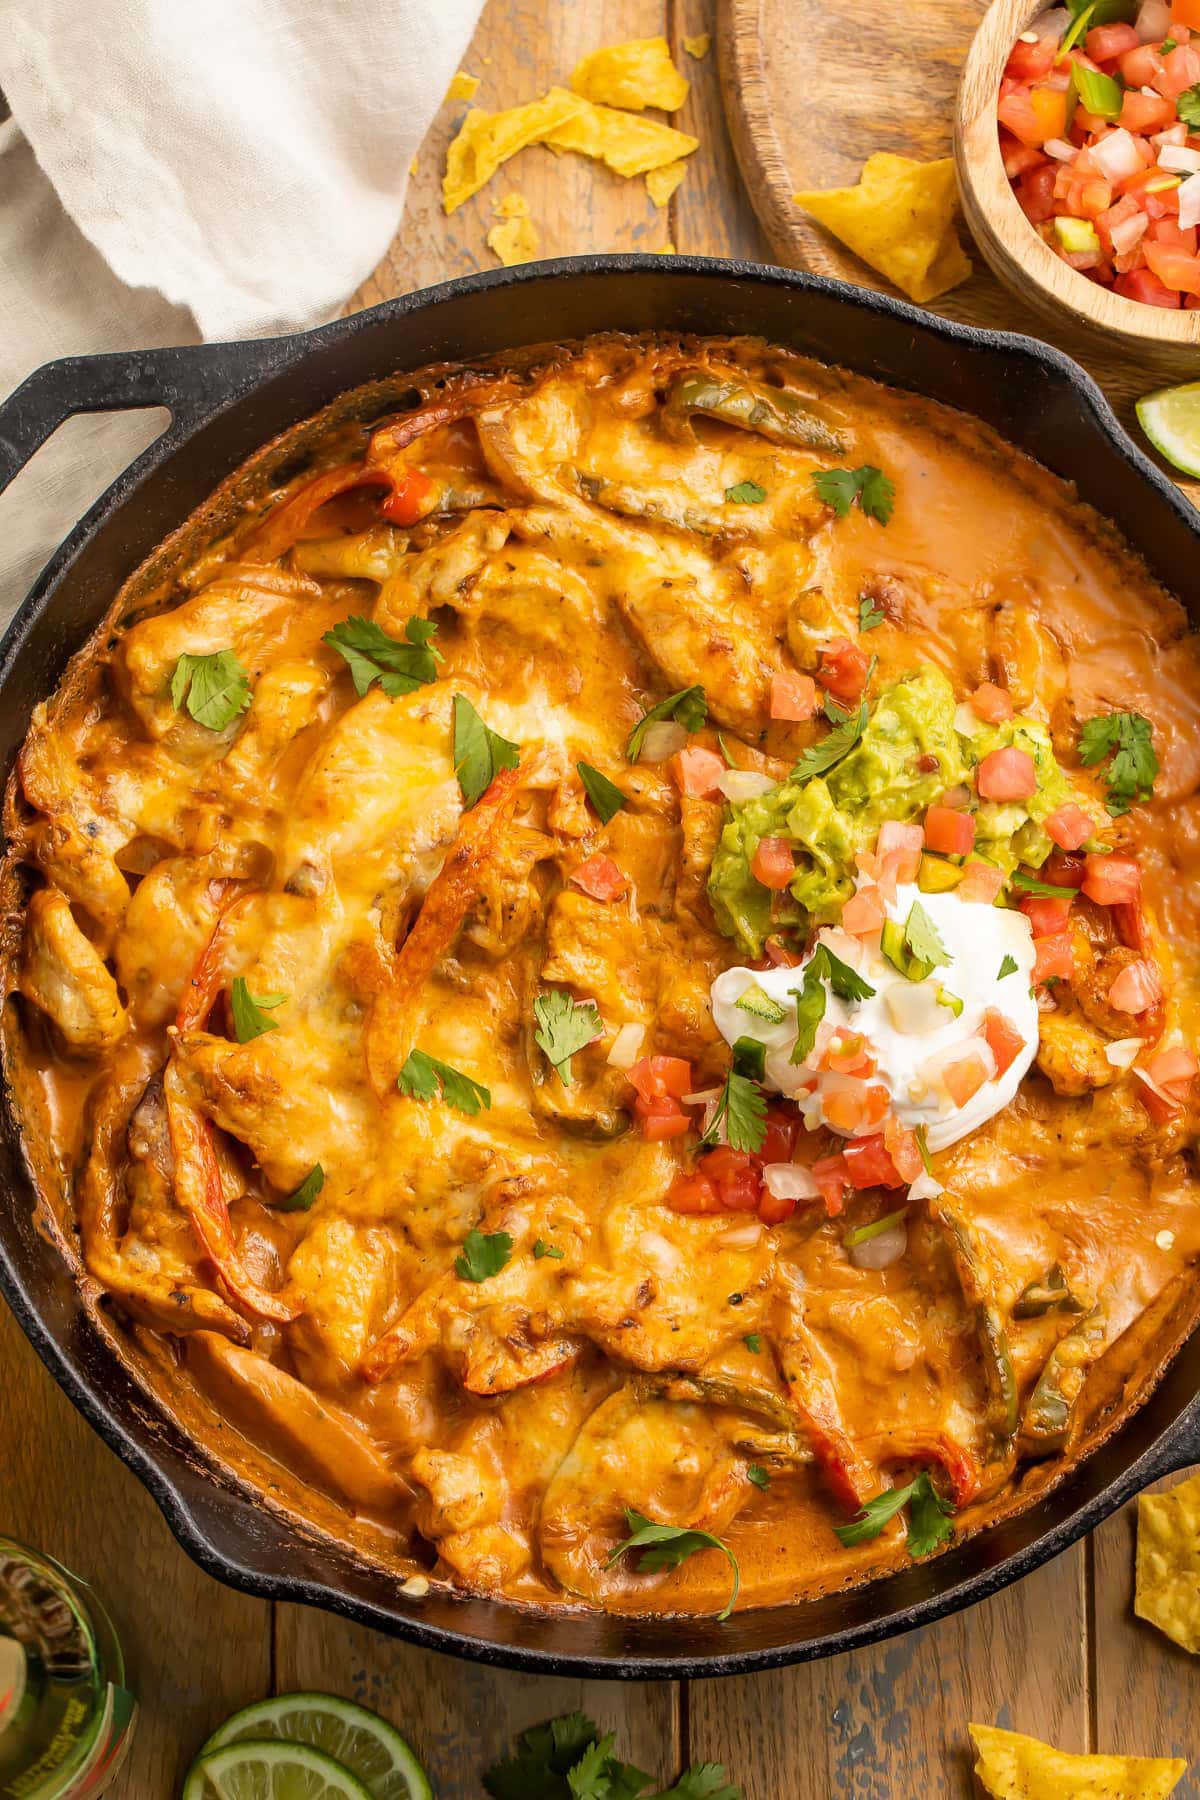 Top-down view of chicken fajita casserole with a creamy sauce in a large black cast iron skillet.